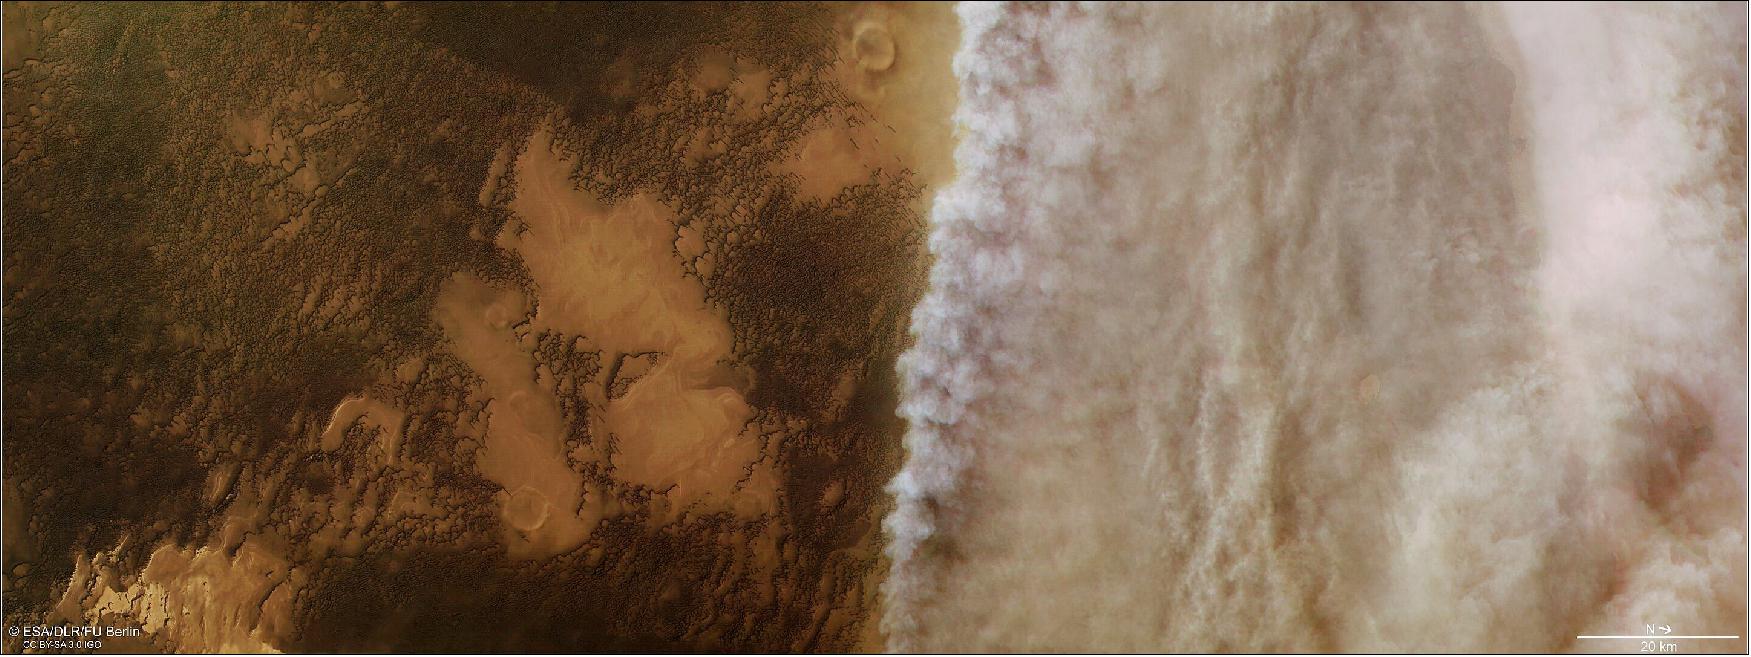 Figure 49: Mars dust storm in April 2018. The high resolution stereo camera on board ESA’s Mars Express captured this impressive upwelling front of dust clouds – visible in the right half of the frame – near the north polar ice cap of Mars in April this year (image credit: ESA/DLR/FU Berlin, CC BY-SA 3.0 IGO)